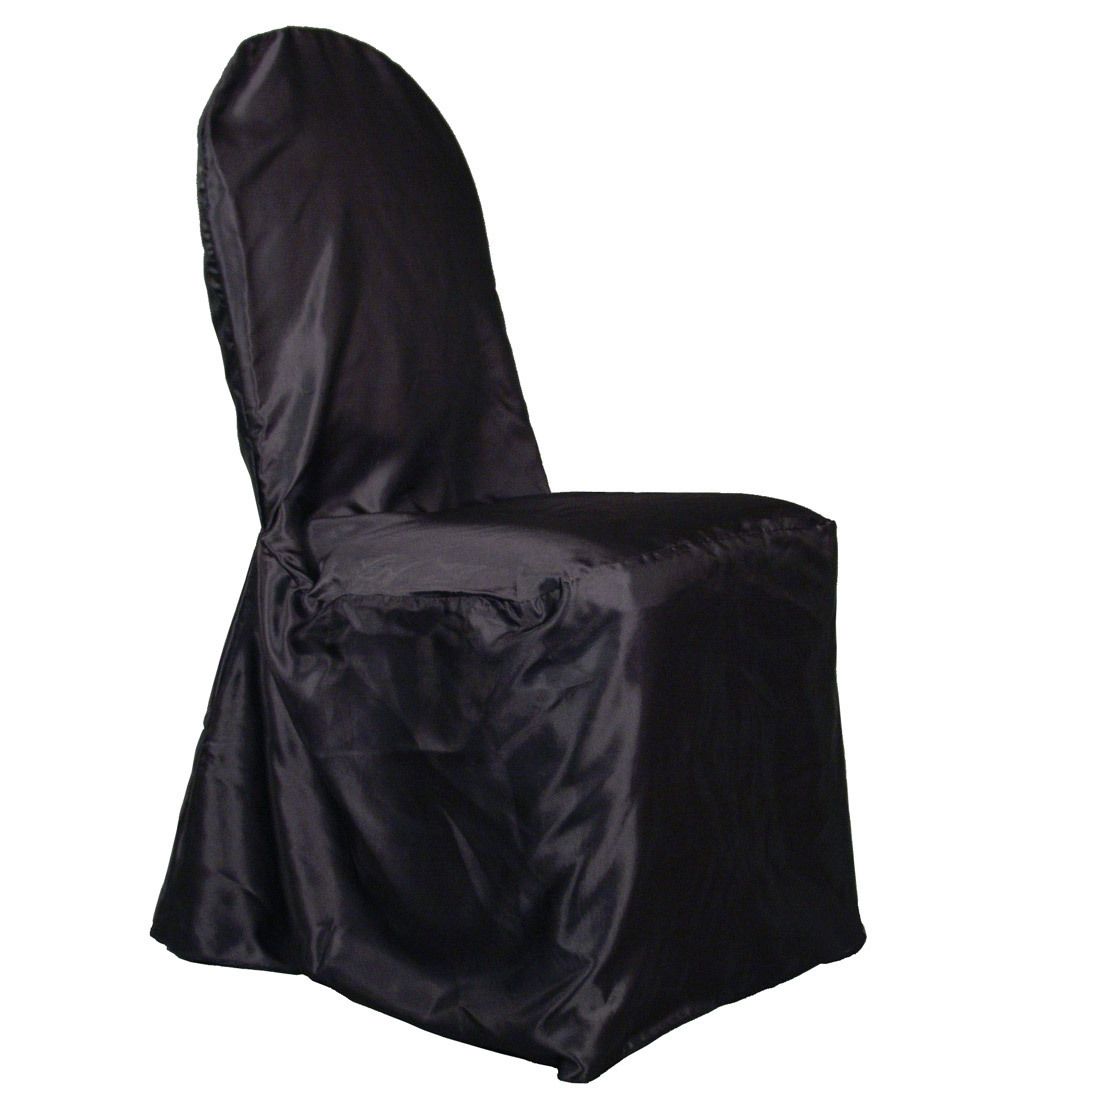 Satin Banquet Chair Cover High Quality for Wedding Shower or Party 